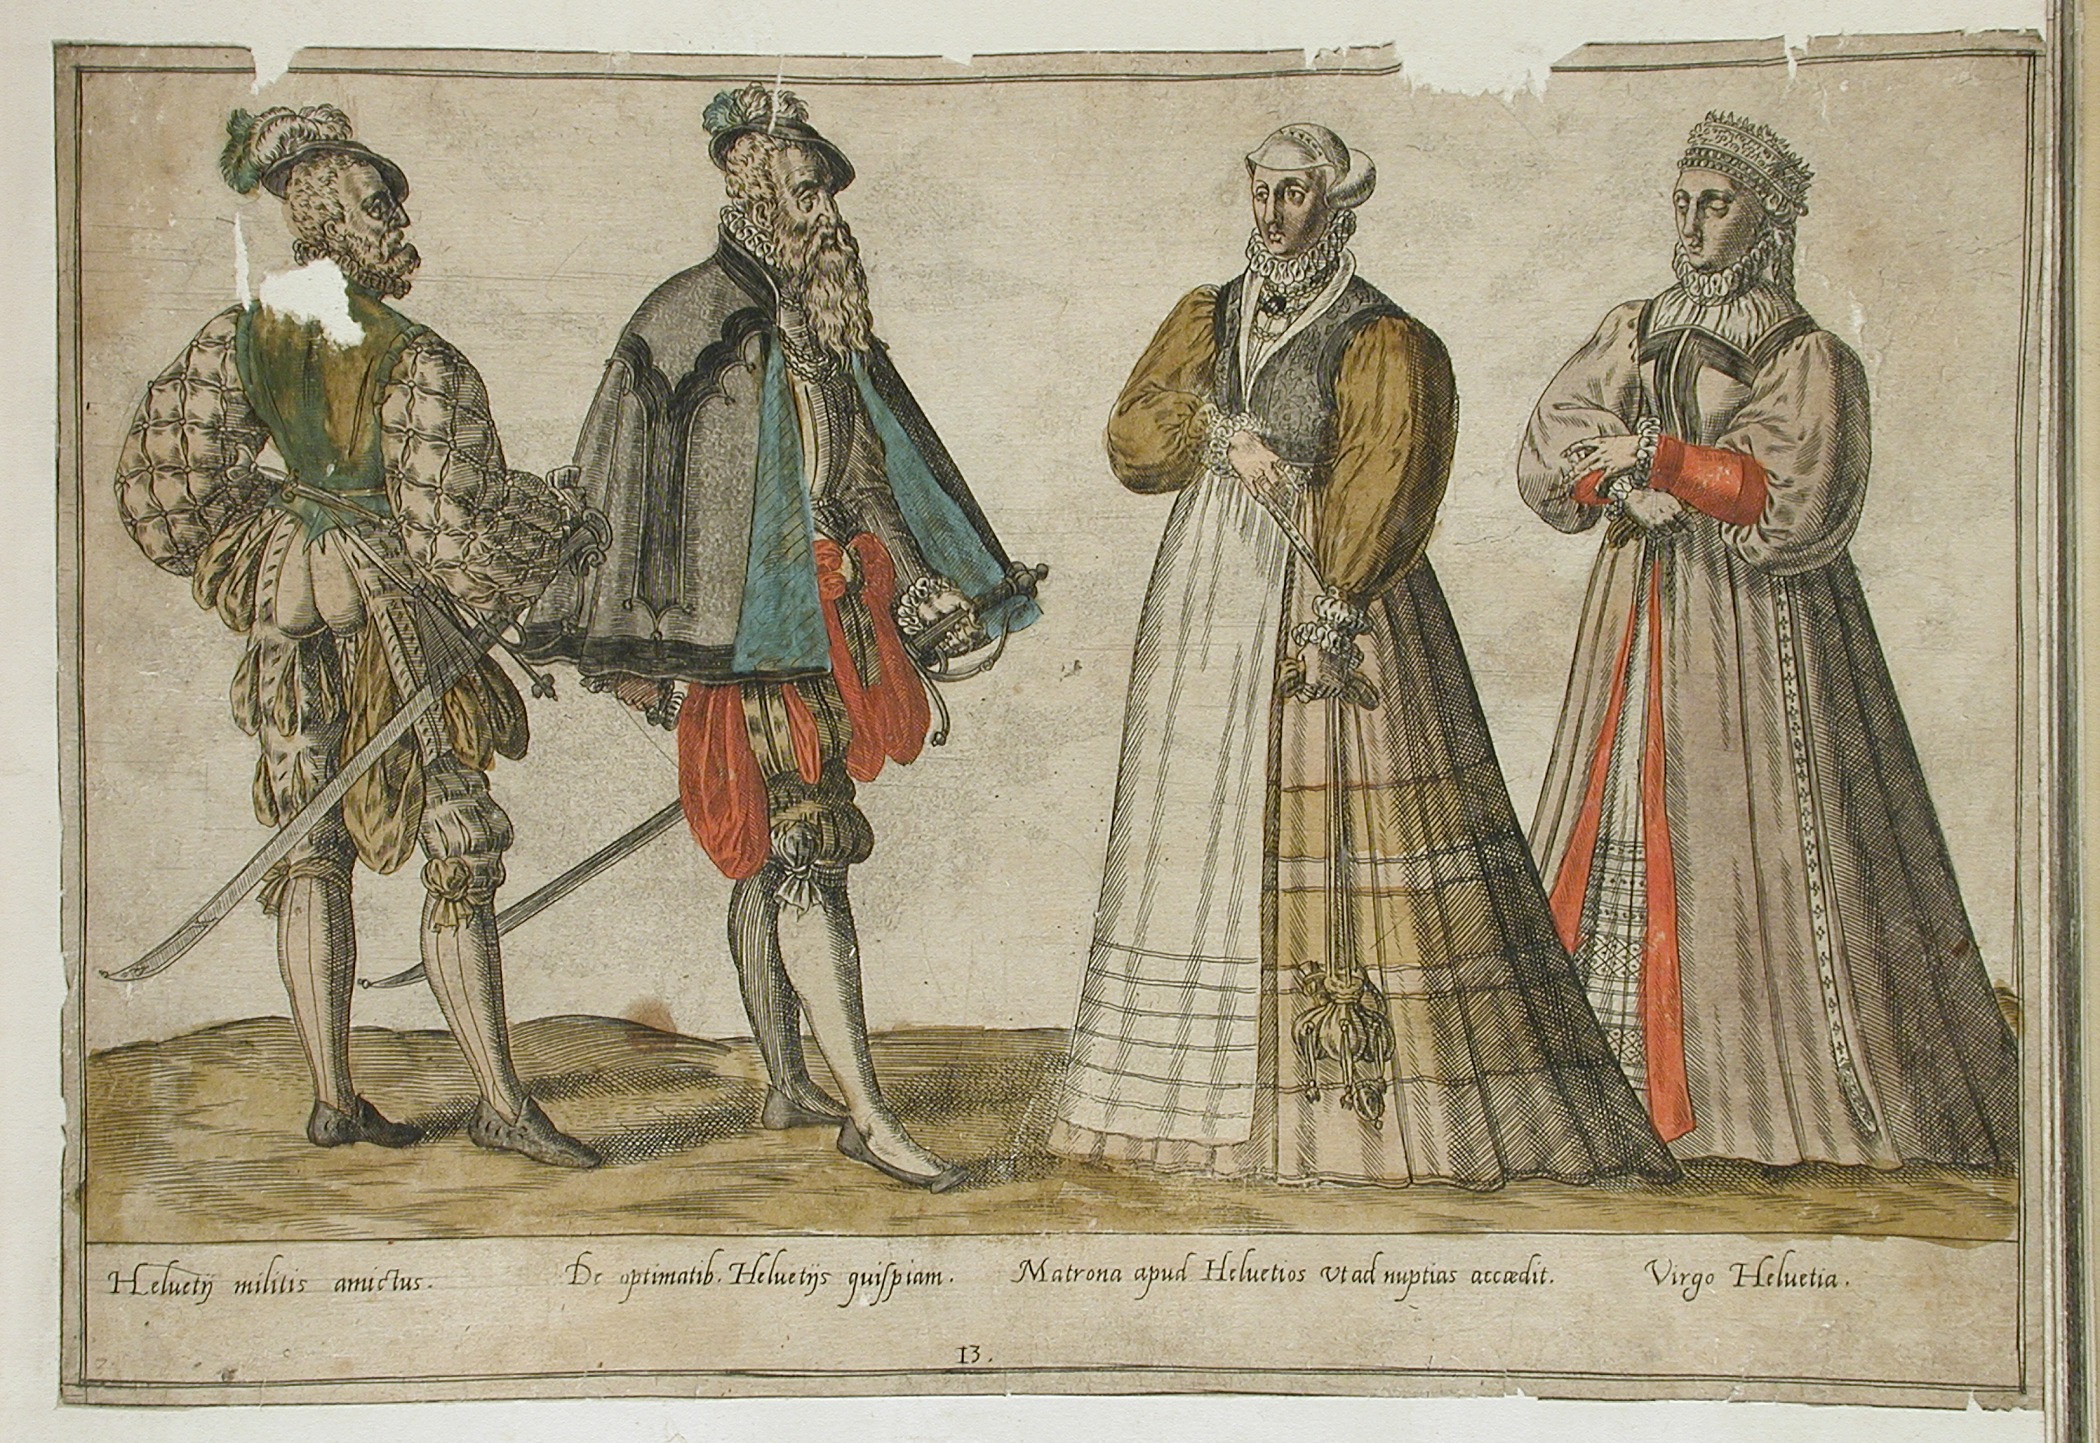 a colored drawing of some people dressed in historical clothing